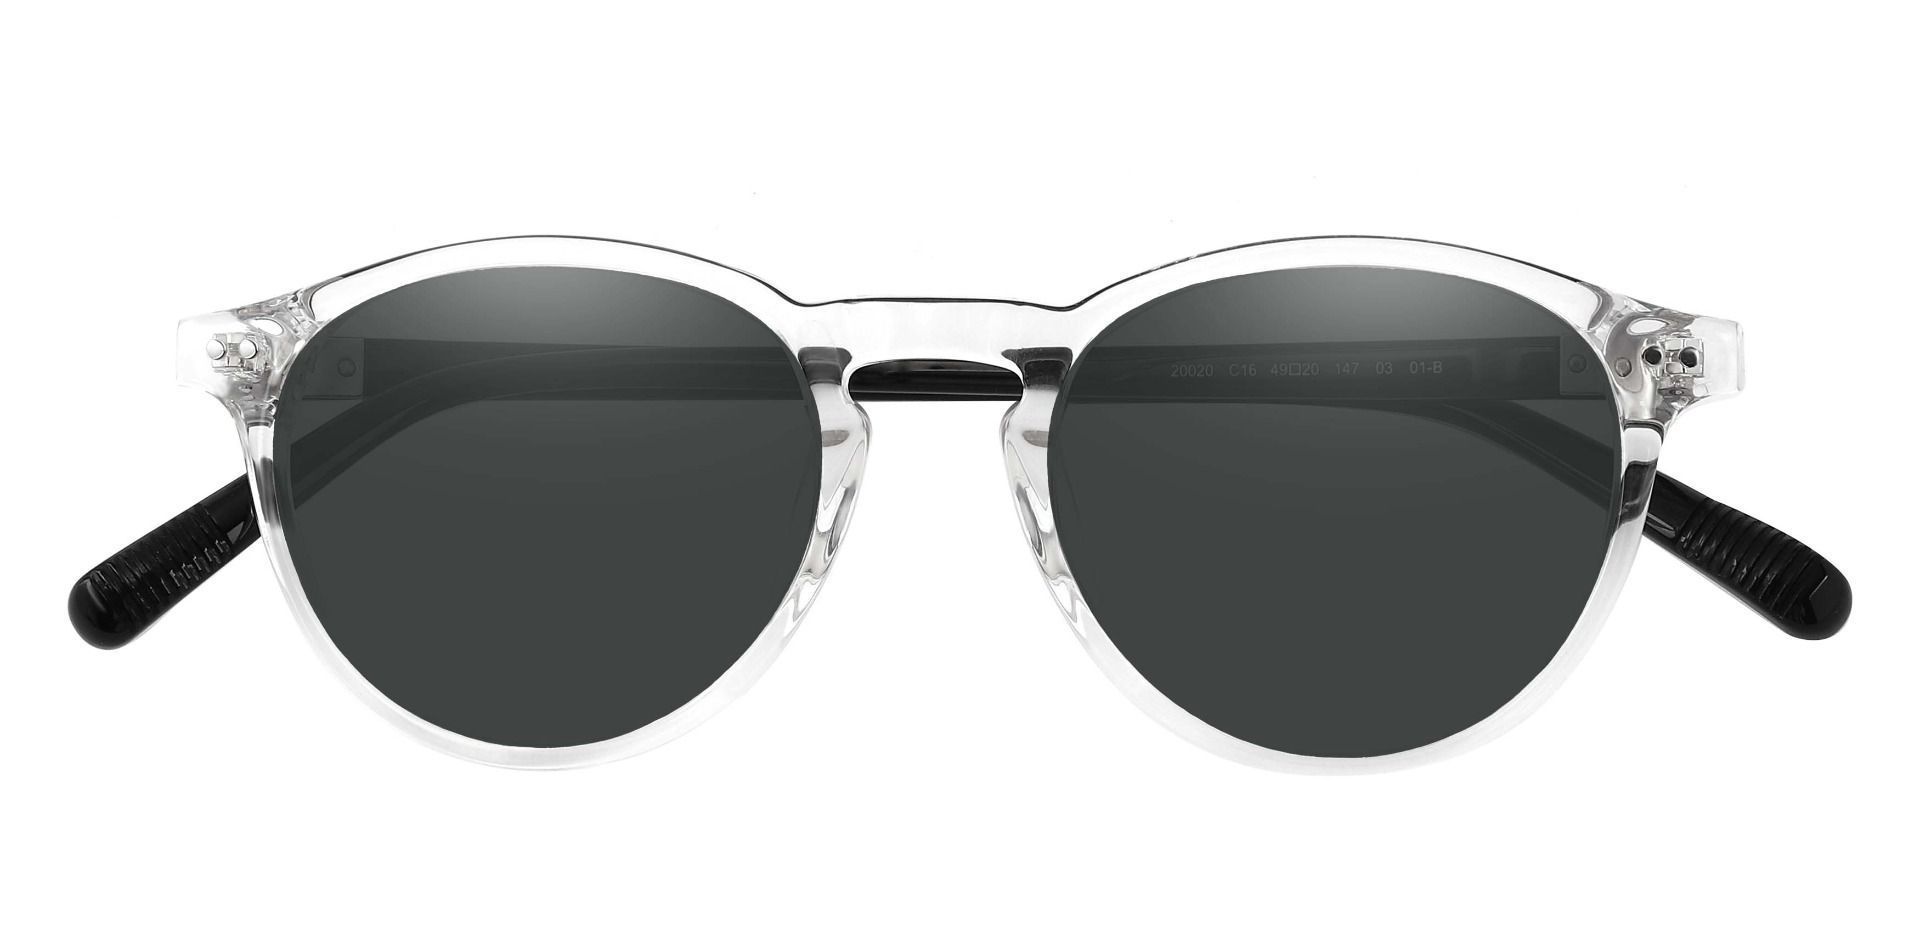 Monarch Oval Progressive Sunglasses - Clear Frame With Gray Lenses